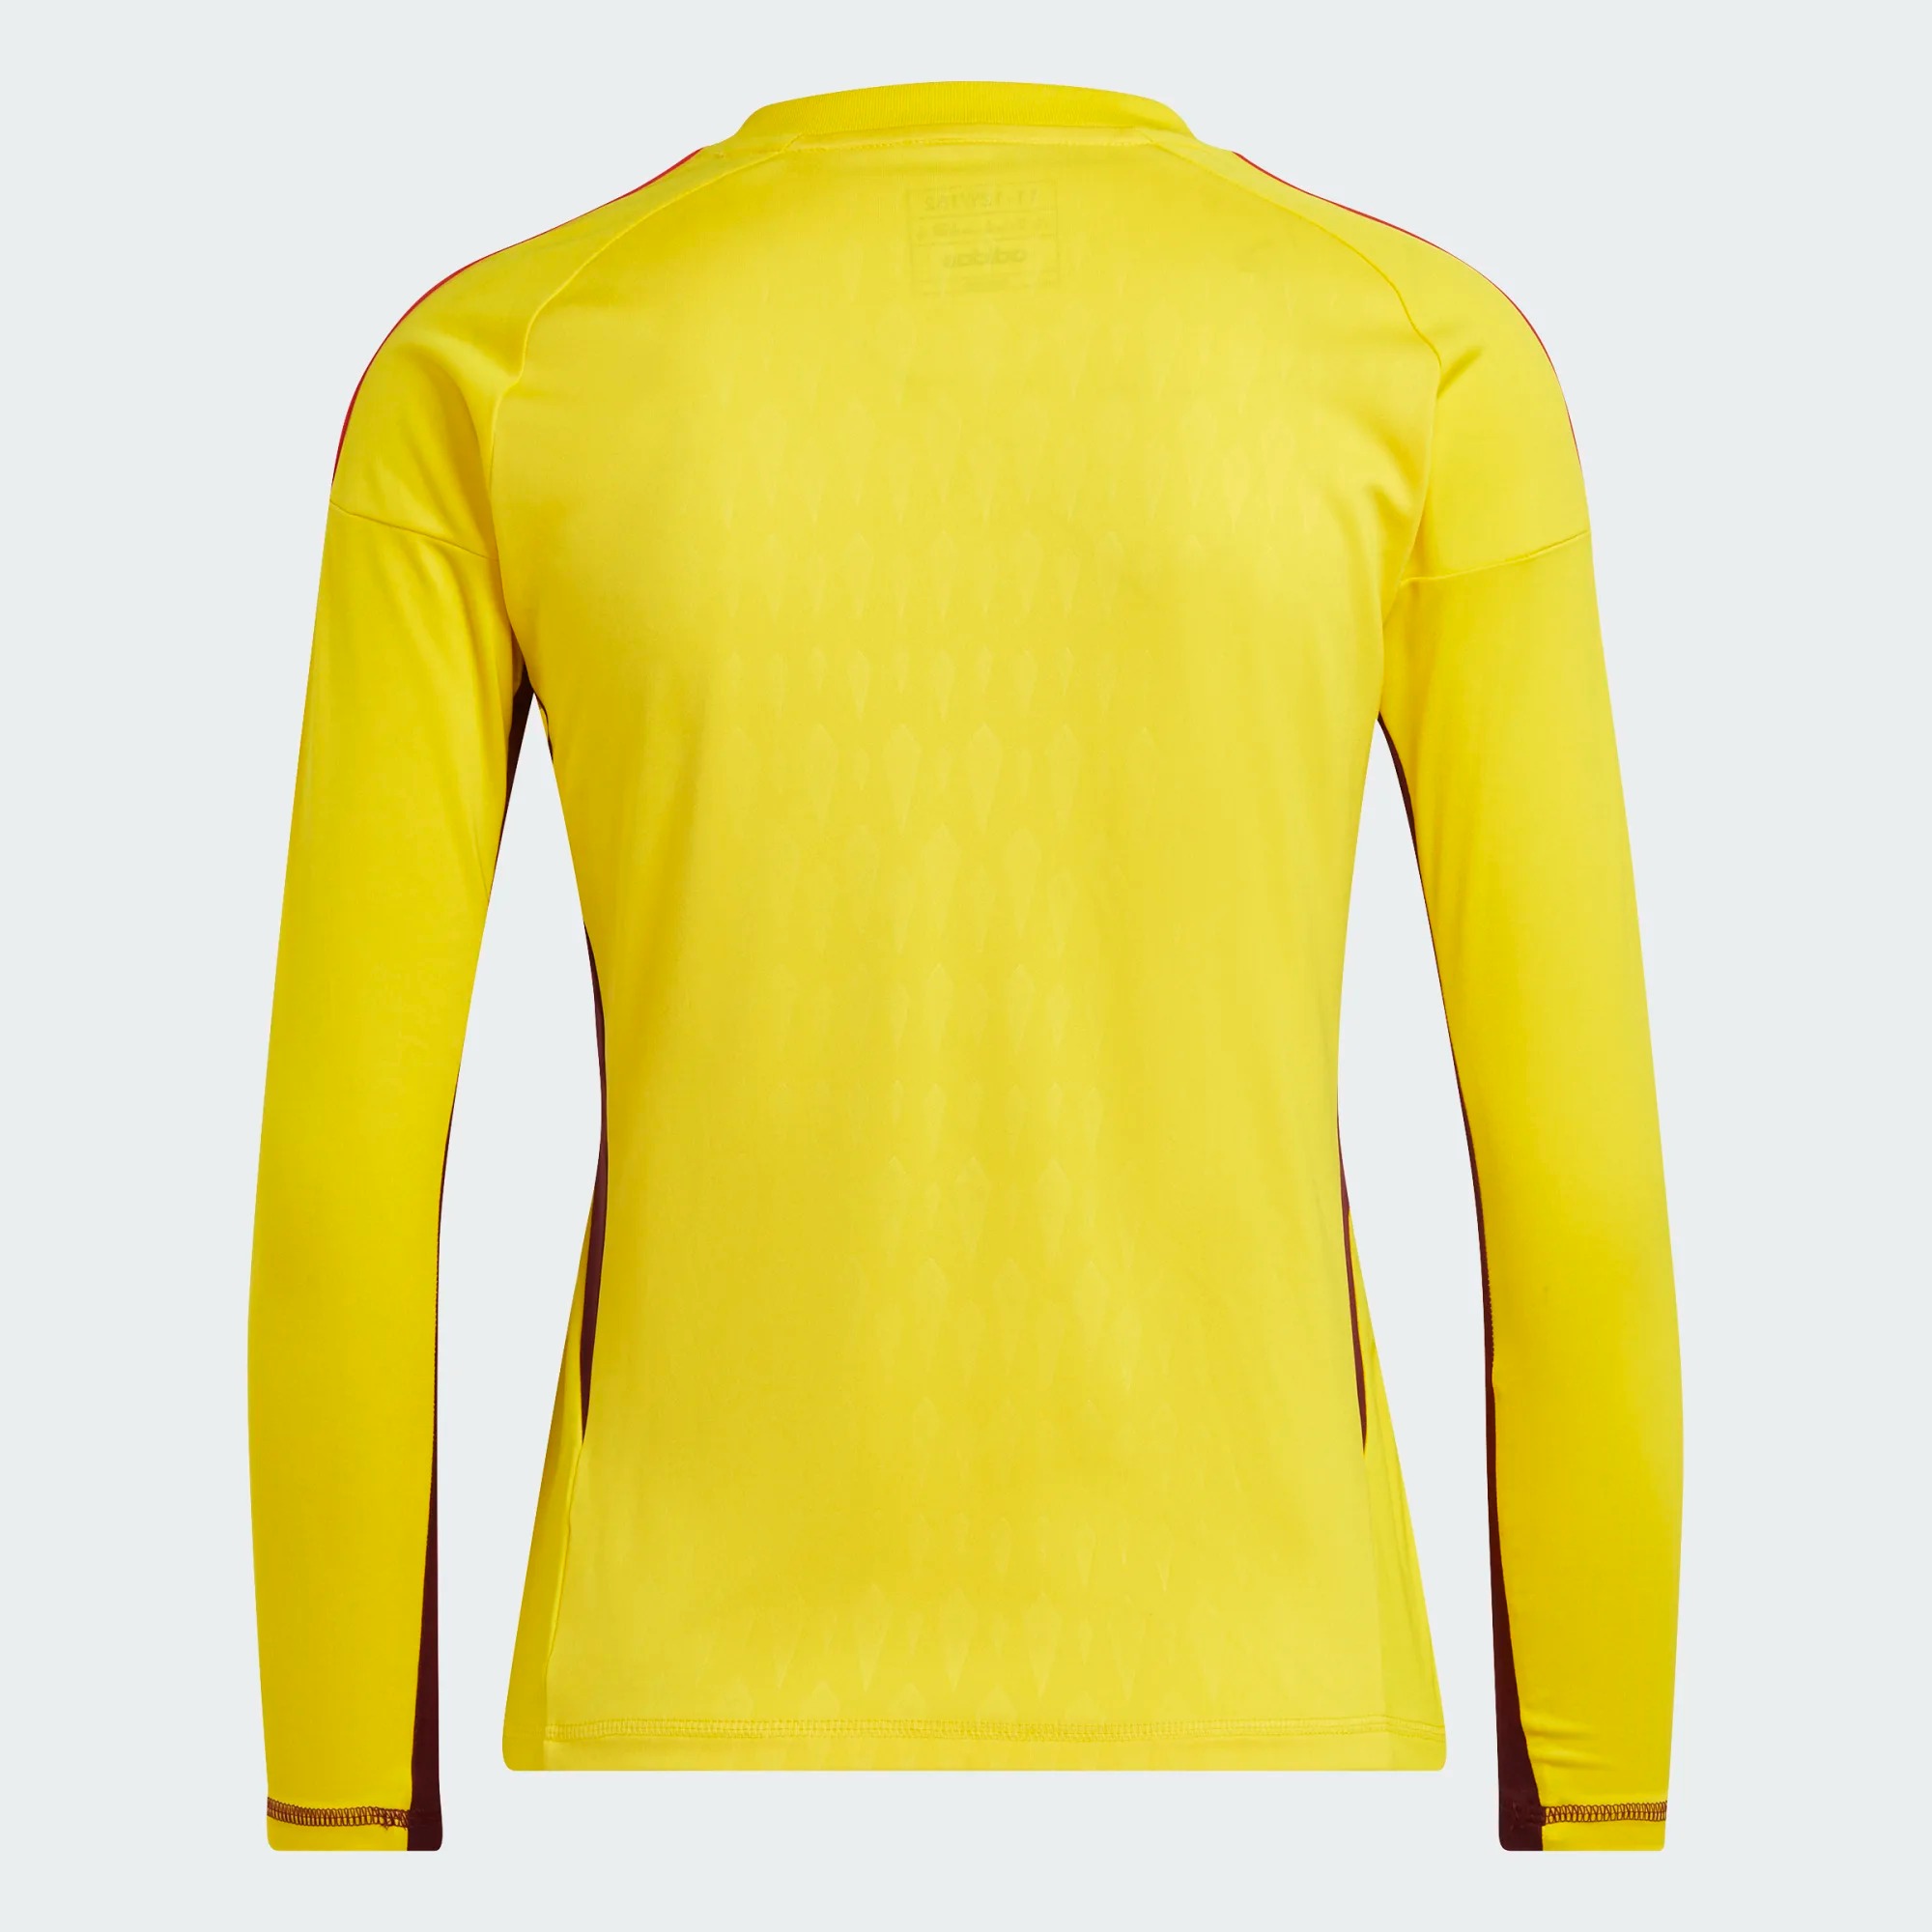 ADIDAS T23 COMPETITION GK JERSEY LS YOUTH TEAM YELLOW